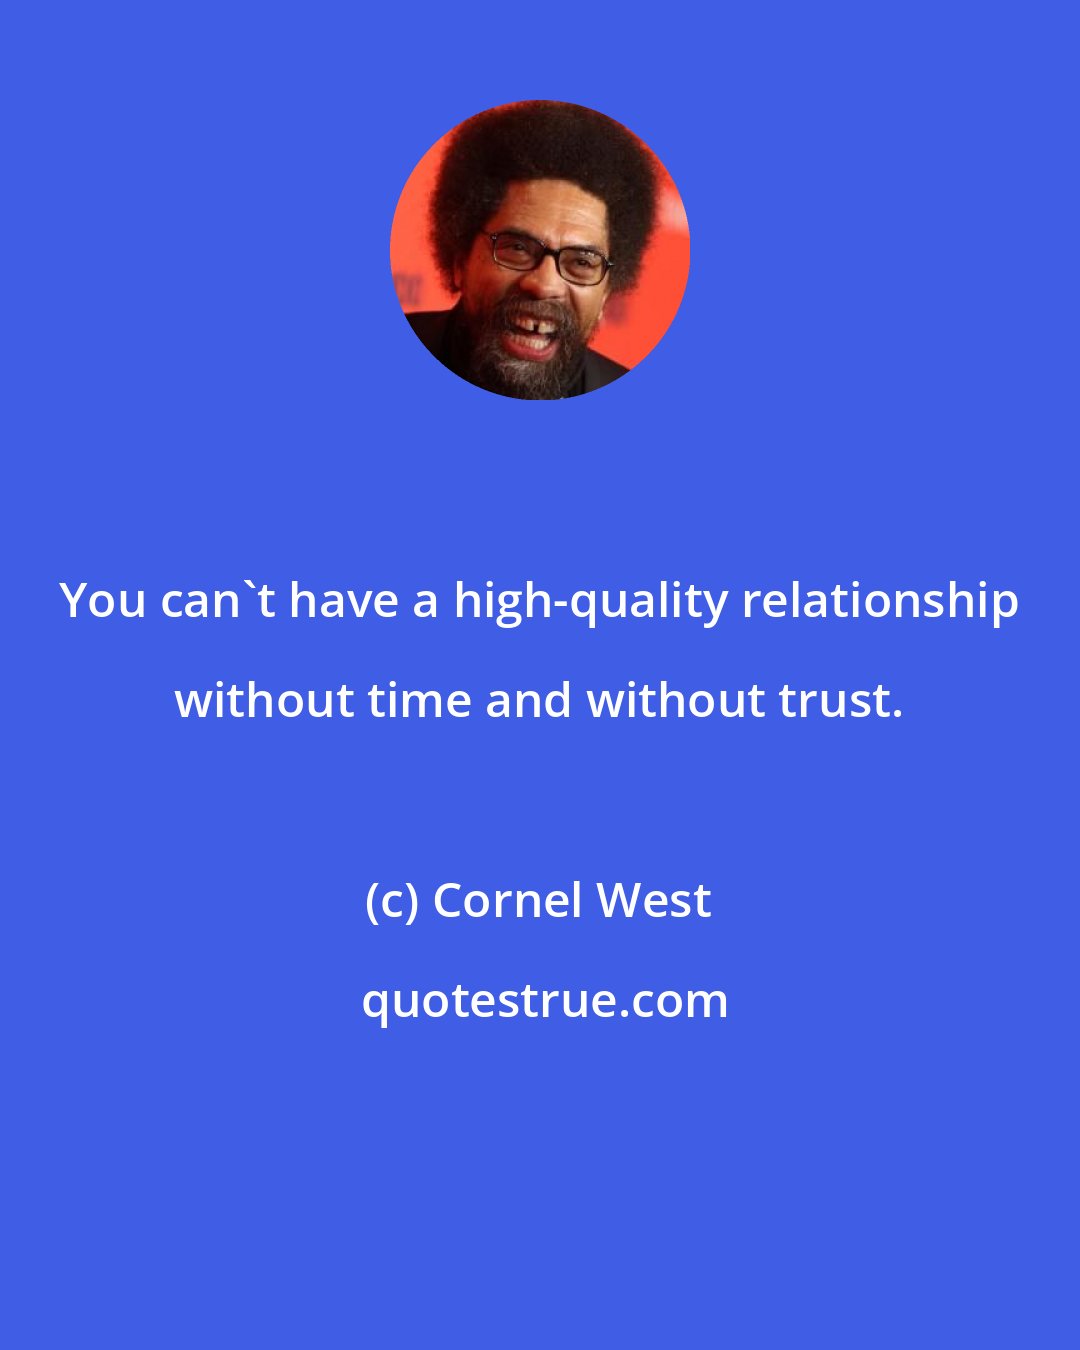 Cornel West: You can't have a high-quality relationship without time and without trust.